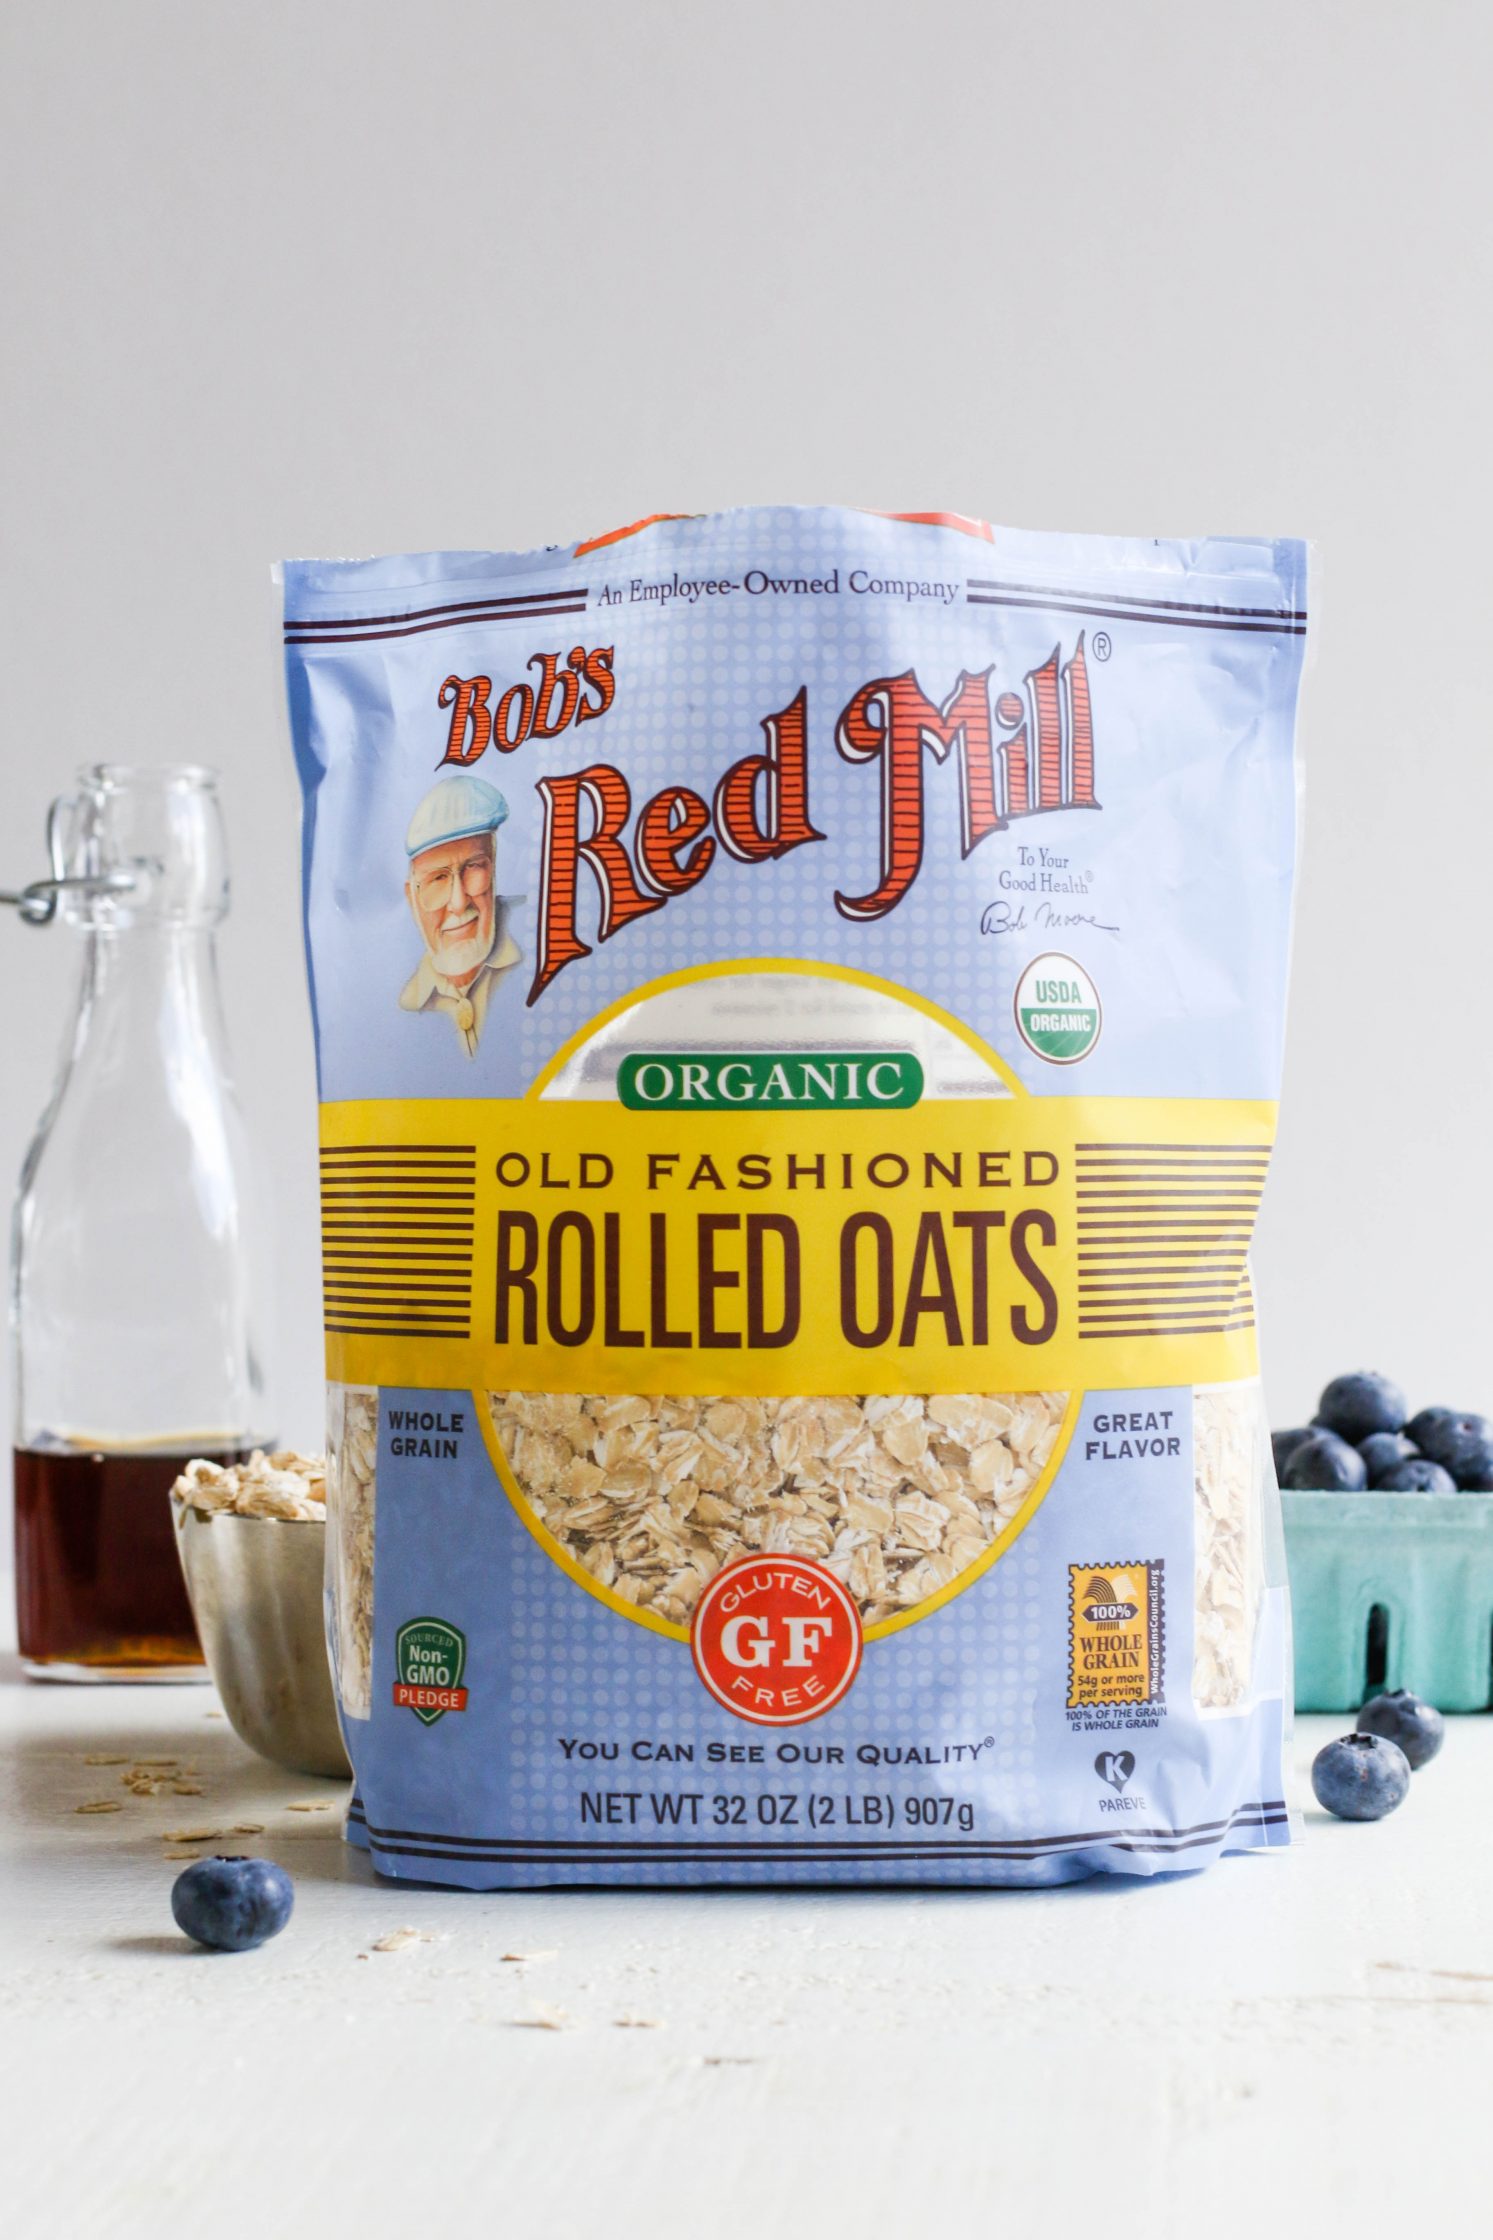 Bob's Red Mill Old-Fashioned Rolled Oats